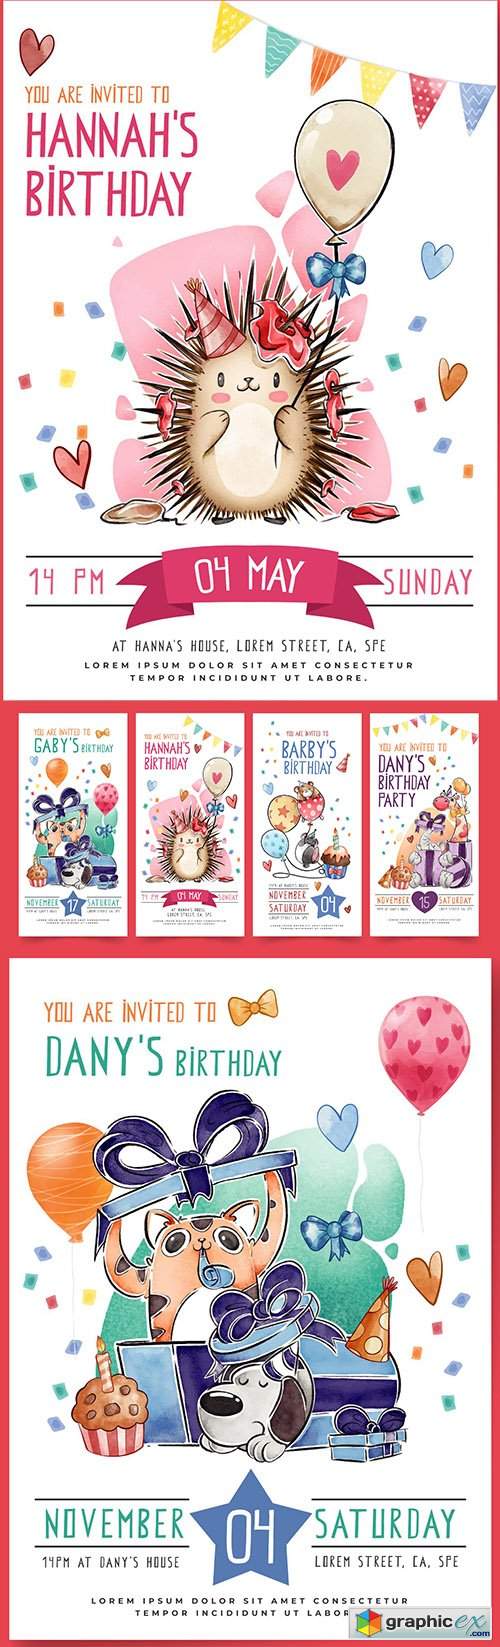  Children's template greeting card and instagram stories on birthday 